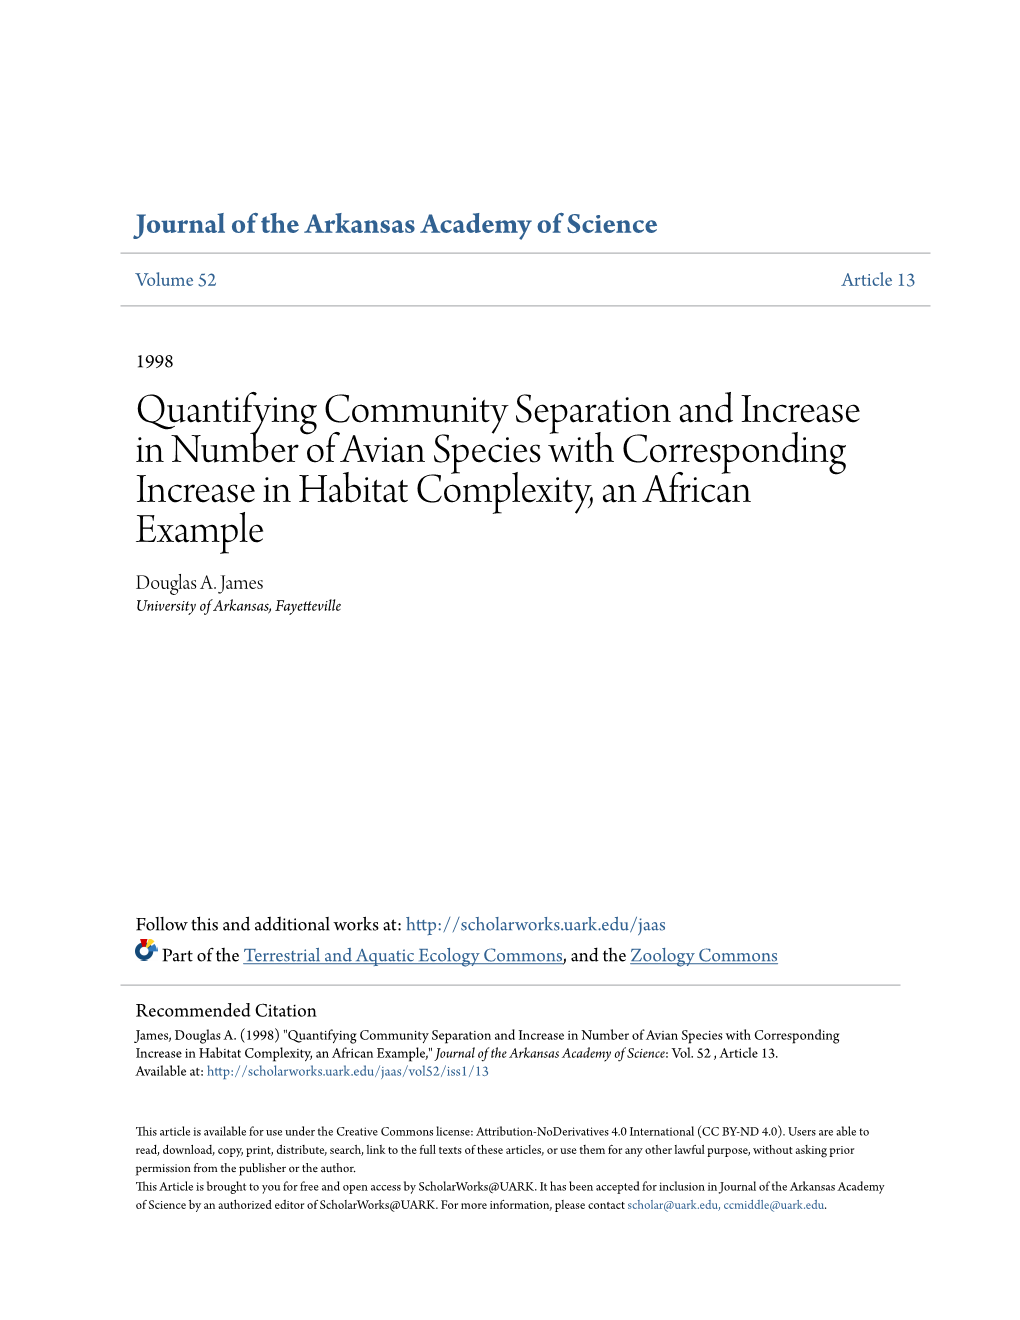 Quantifying Community Separation and Increase in Number of Avian Species with Corresponding Increase in Habitat Complexity, an African Example Douglas A